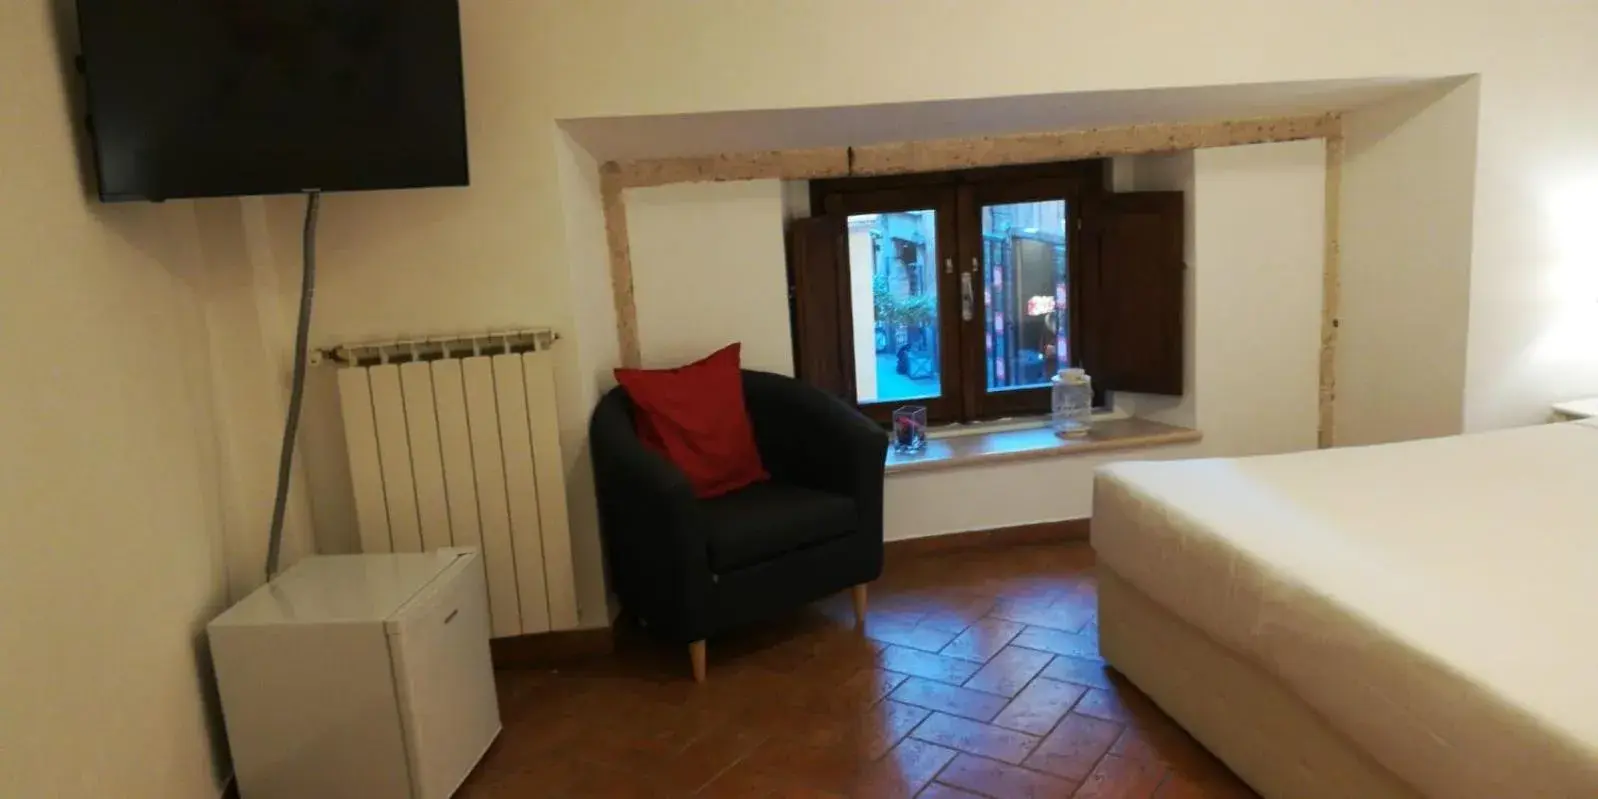 TV and multimedia, Seating Area in Relais Arco Della Pace